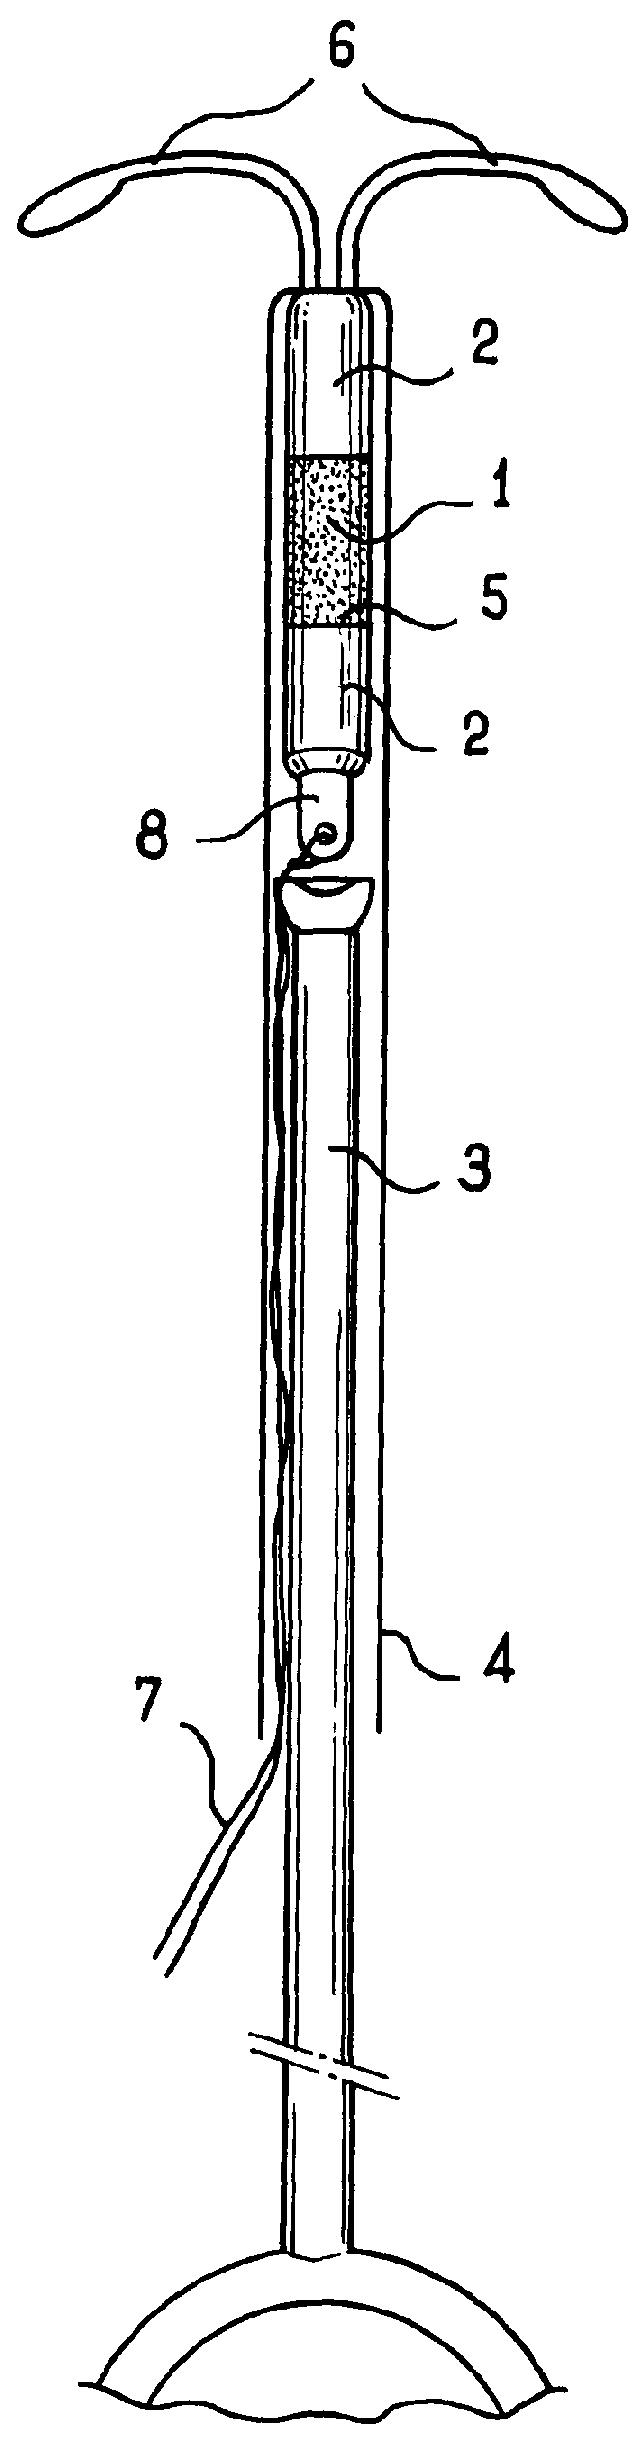 Intrauterine device, method of making such a device and method for putting active elements within the uterine cavity